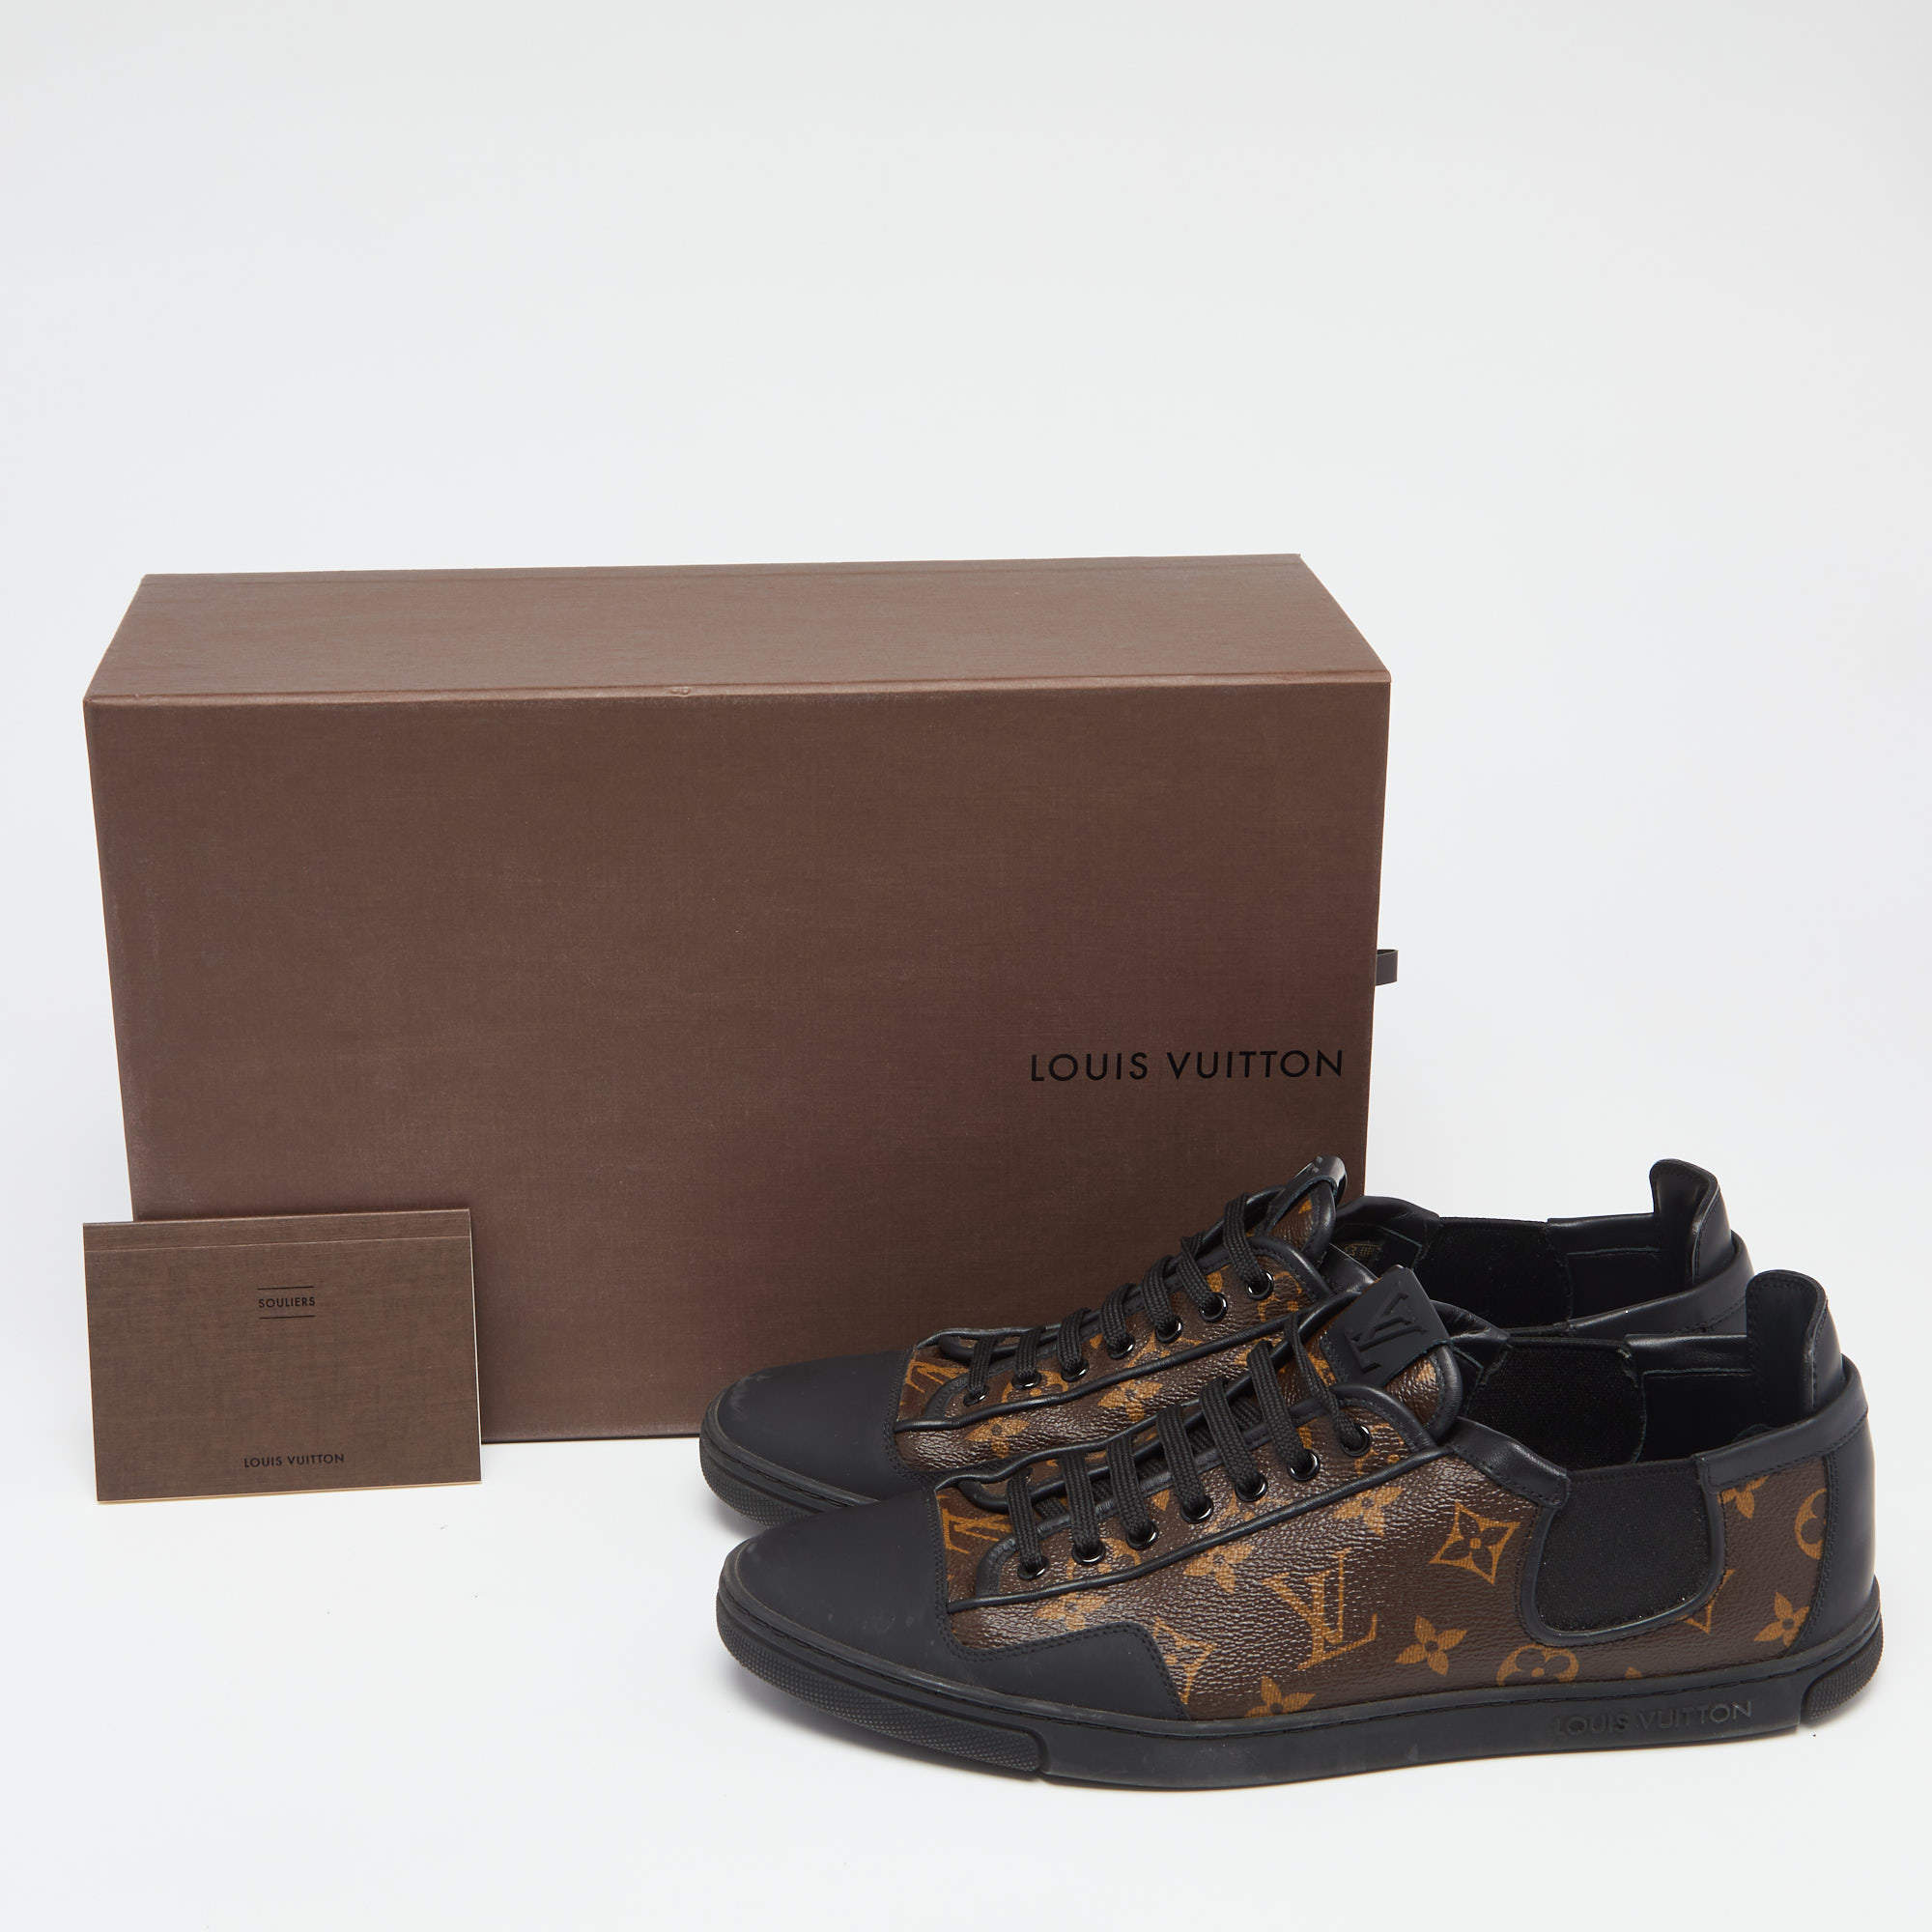 LOUIS VUITTON SLALOM Low Top Sneaker Black And Brown Monogram Leather Size  9.5 $400.00 - PicClick